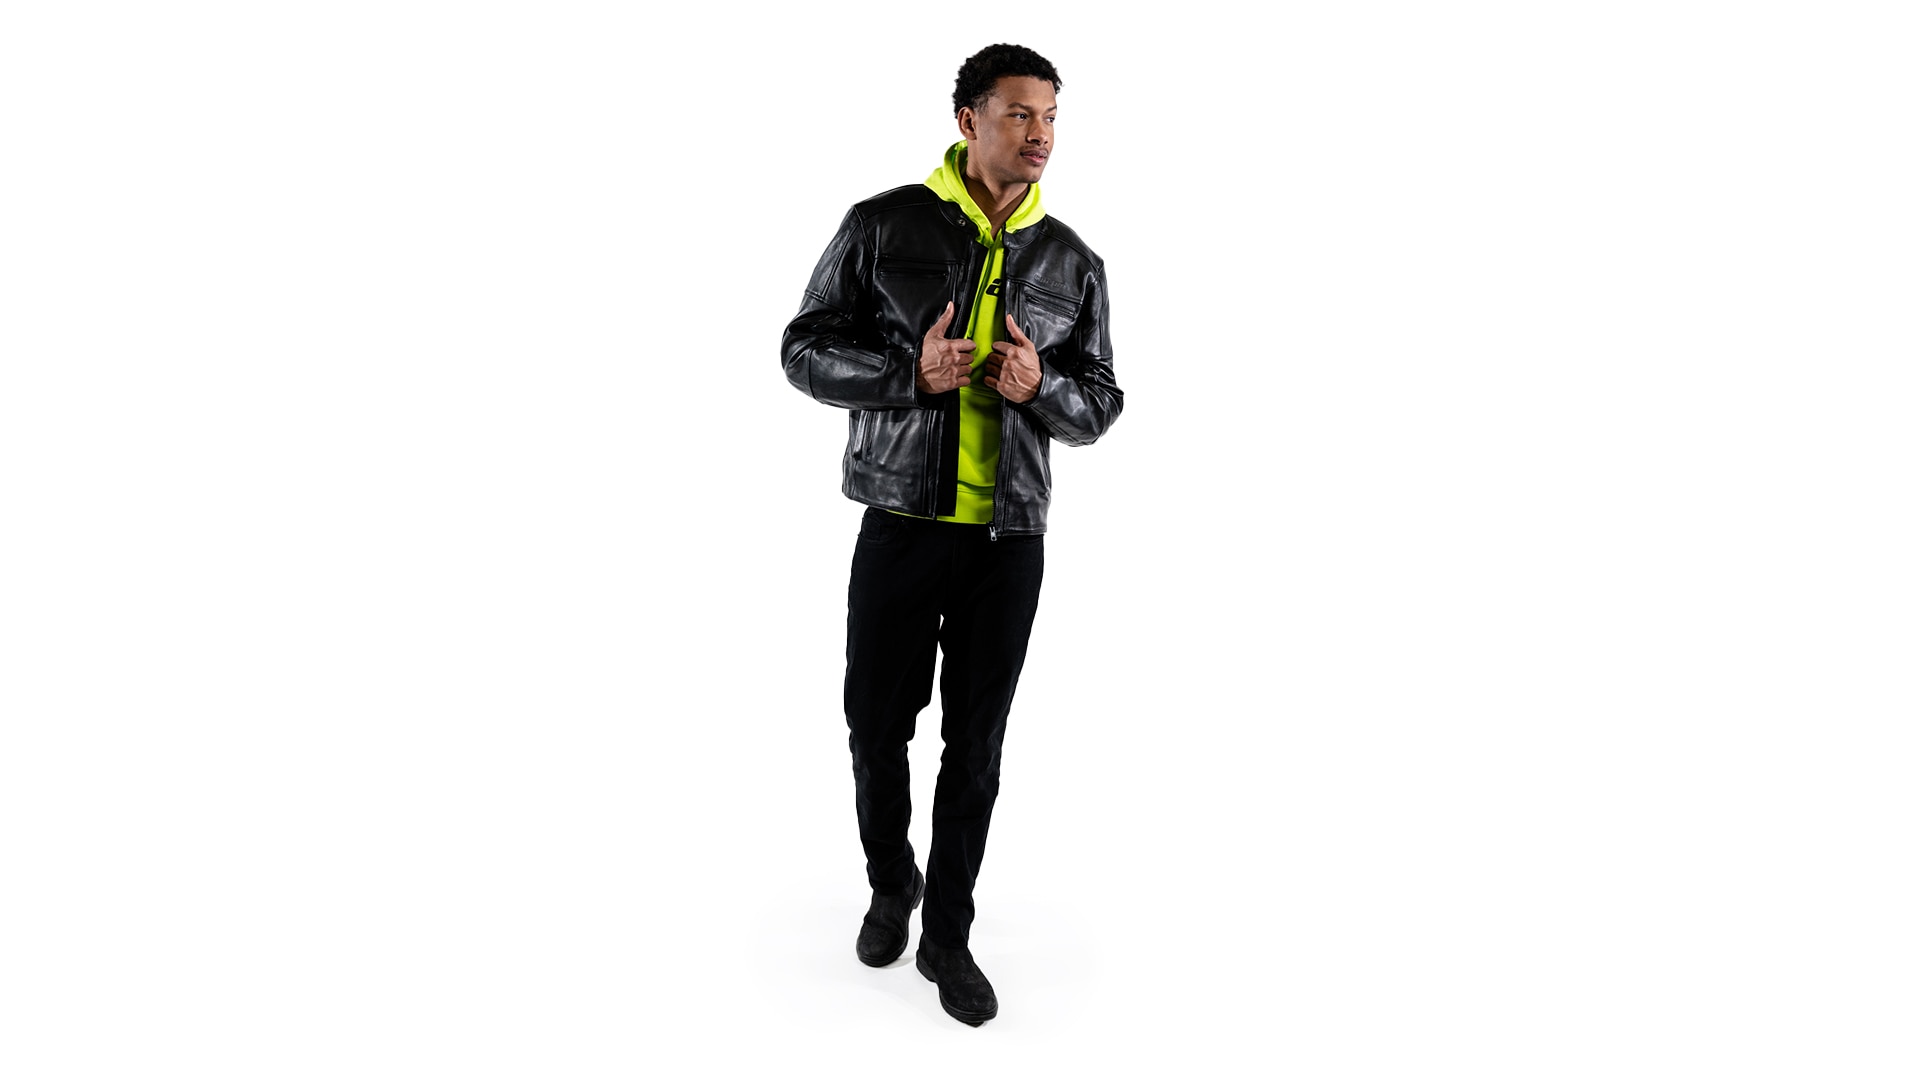 Can-Am model wearing Brode Jacket